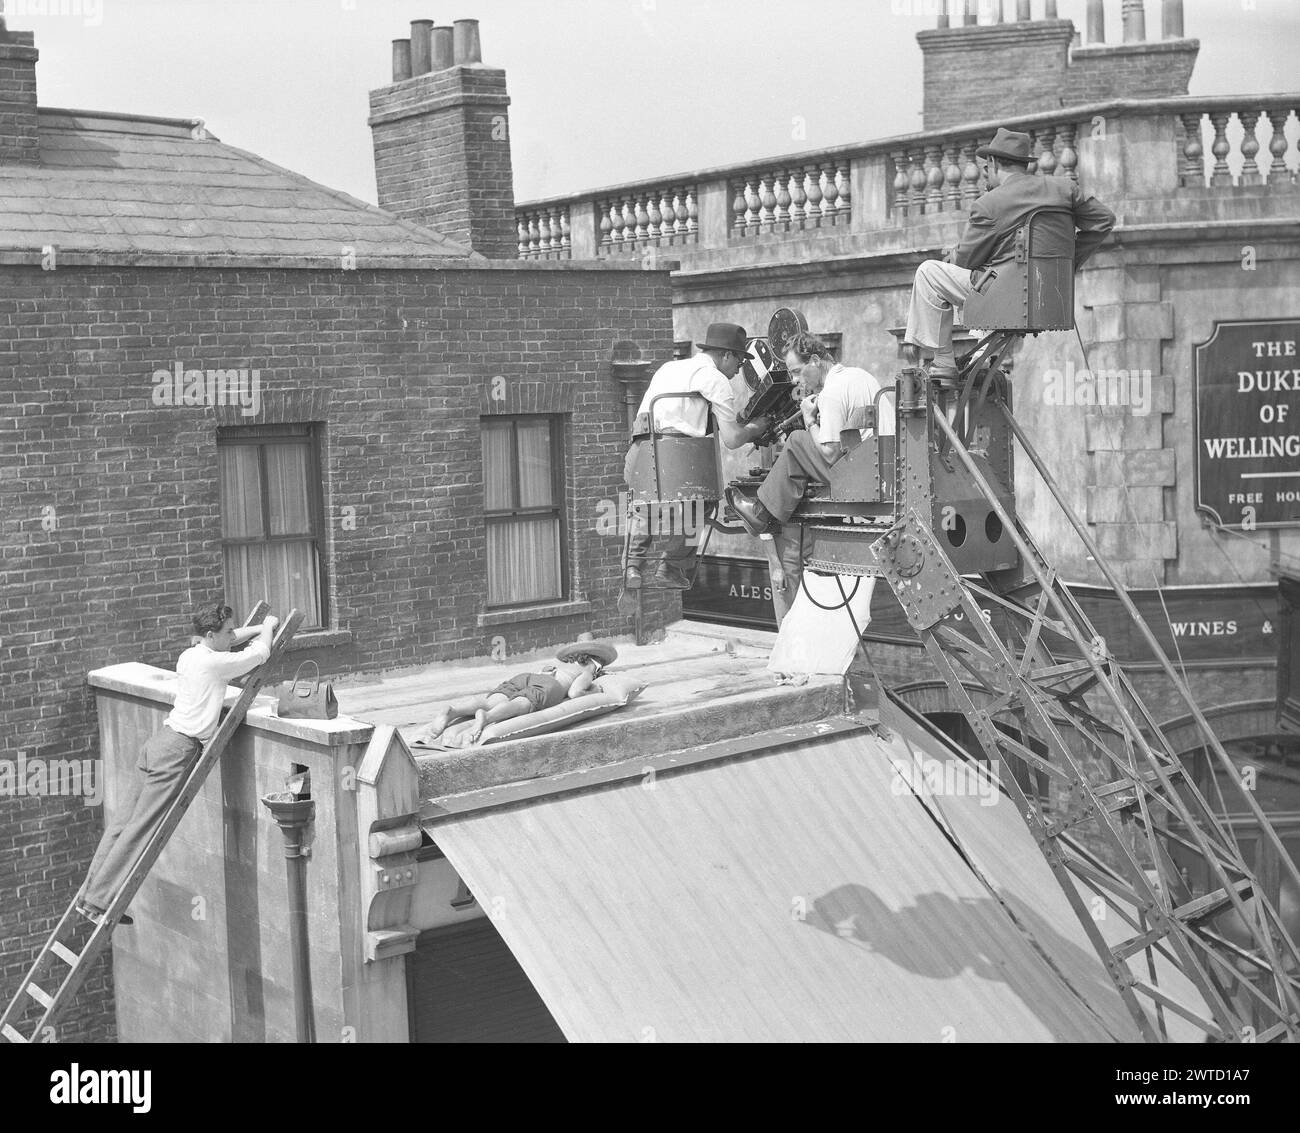 Filming the opening sequence with JANE HYLTON for the EALING comedy PASSPORT TO PIMLICO 1949 on location in a large bombsite in Lambeth Director HENRY CORNELIUS  Screenplay T.E.B. CLARKE Music GEORGES AURIC Ealing Studios Stock Photo